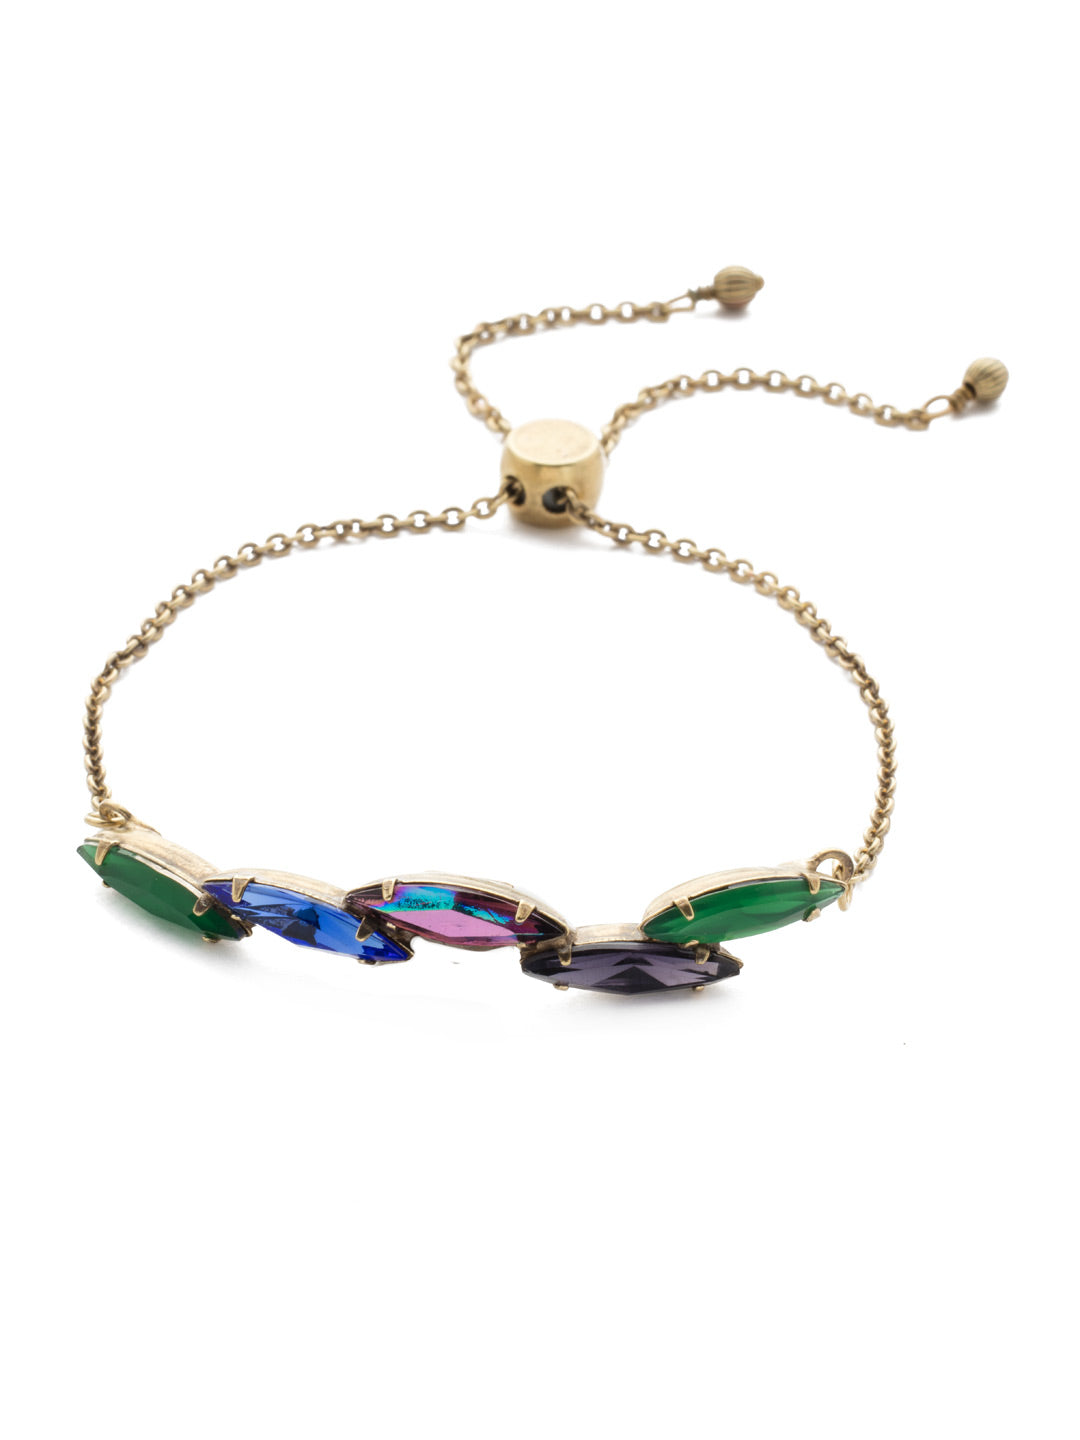 Daenery's Slider Bracelet - BEF16AGGOT - This bracelet is crafted with a delicate line of dancing marquise crystals with an eye catching sparkle and can be easily adjusted to create the ideal fit. From Sorrelli's Game of Jewel Tones collection in our Antique Gold-tone finish.